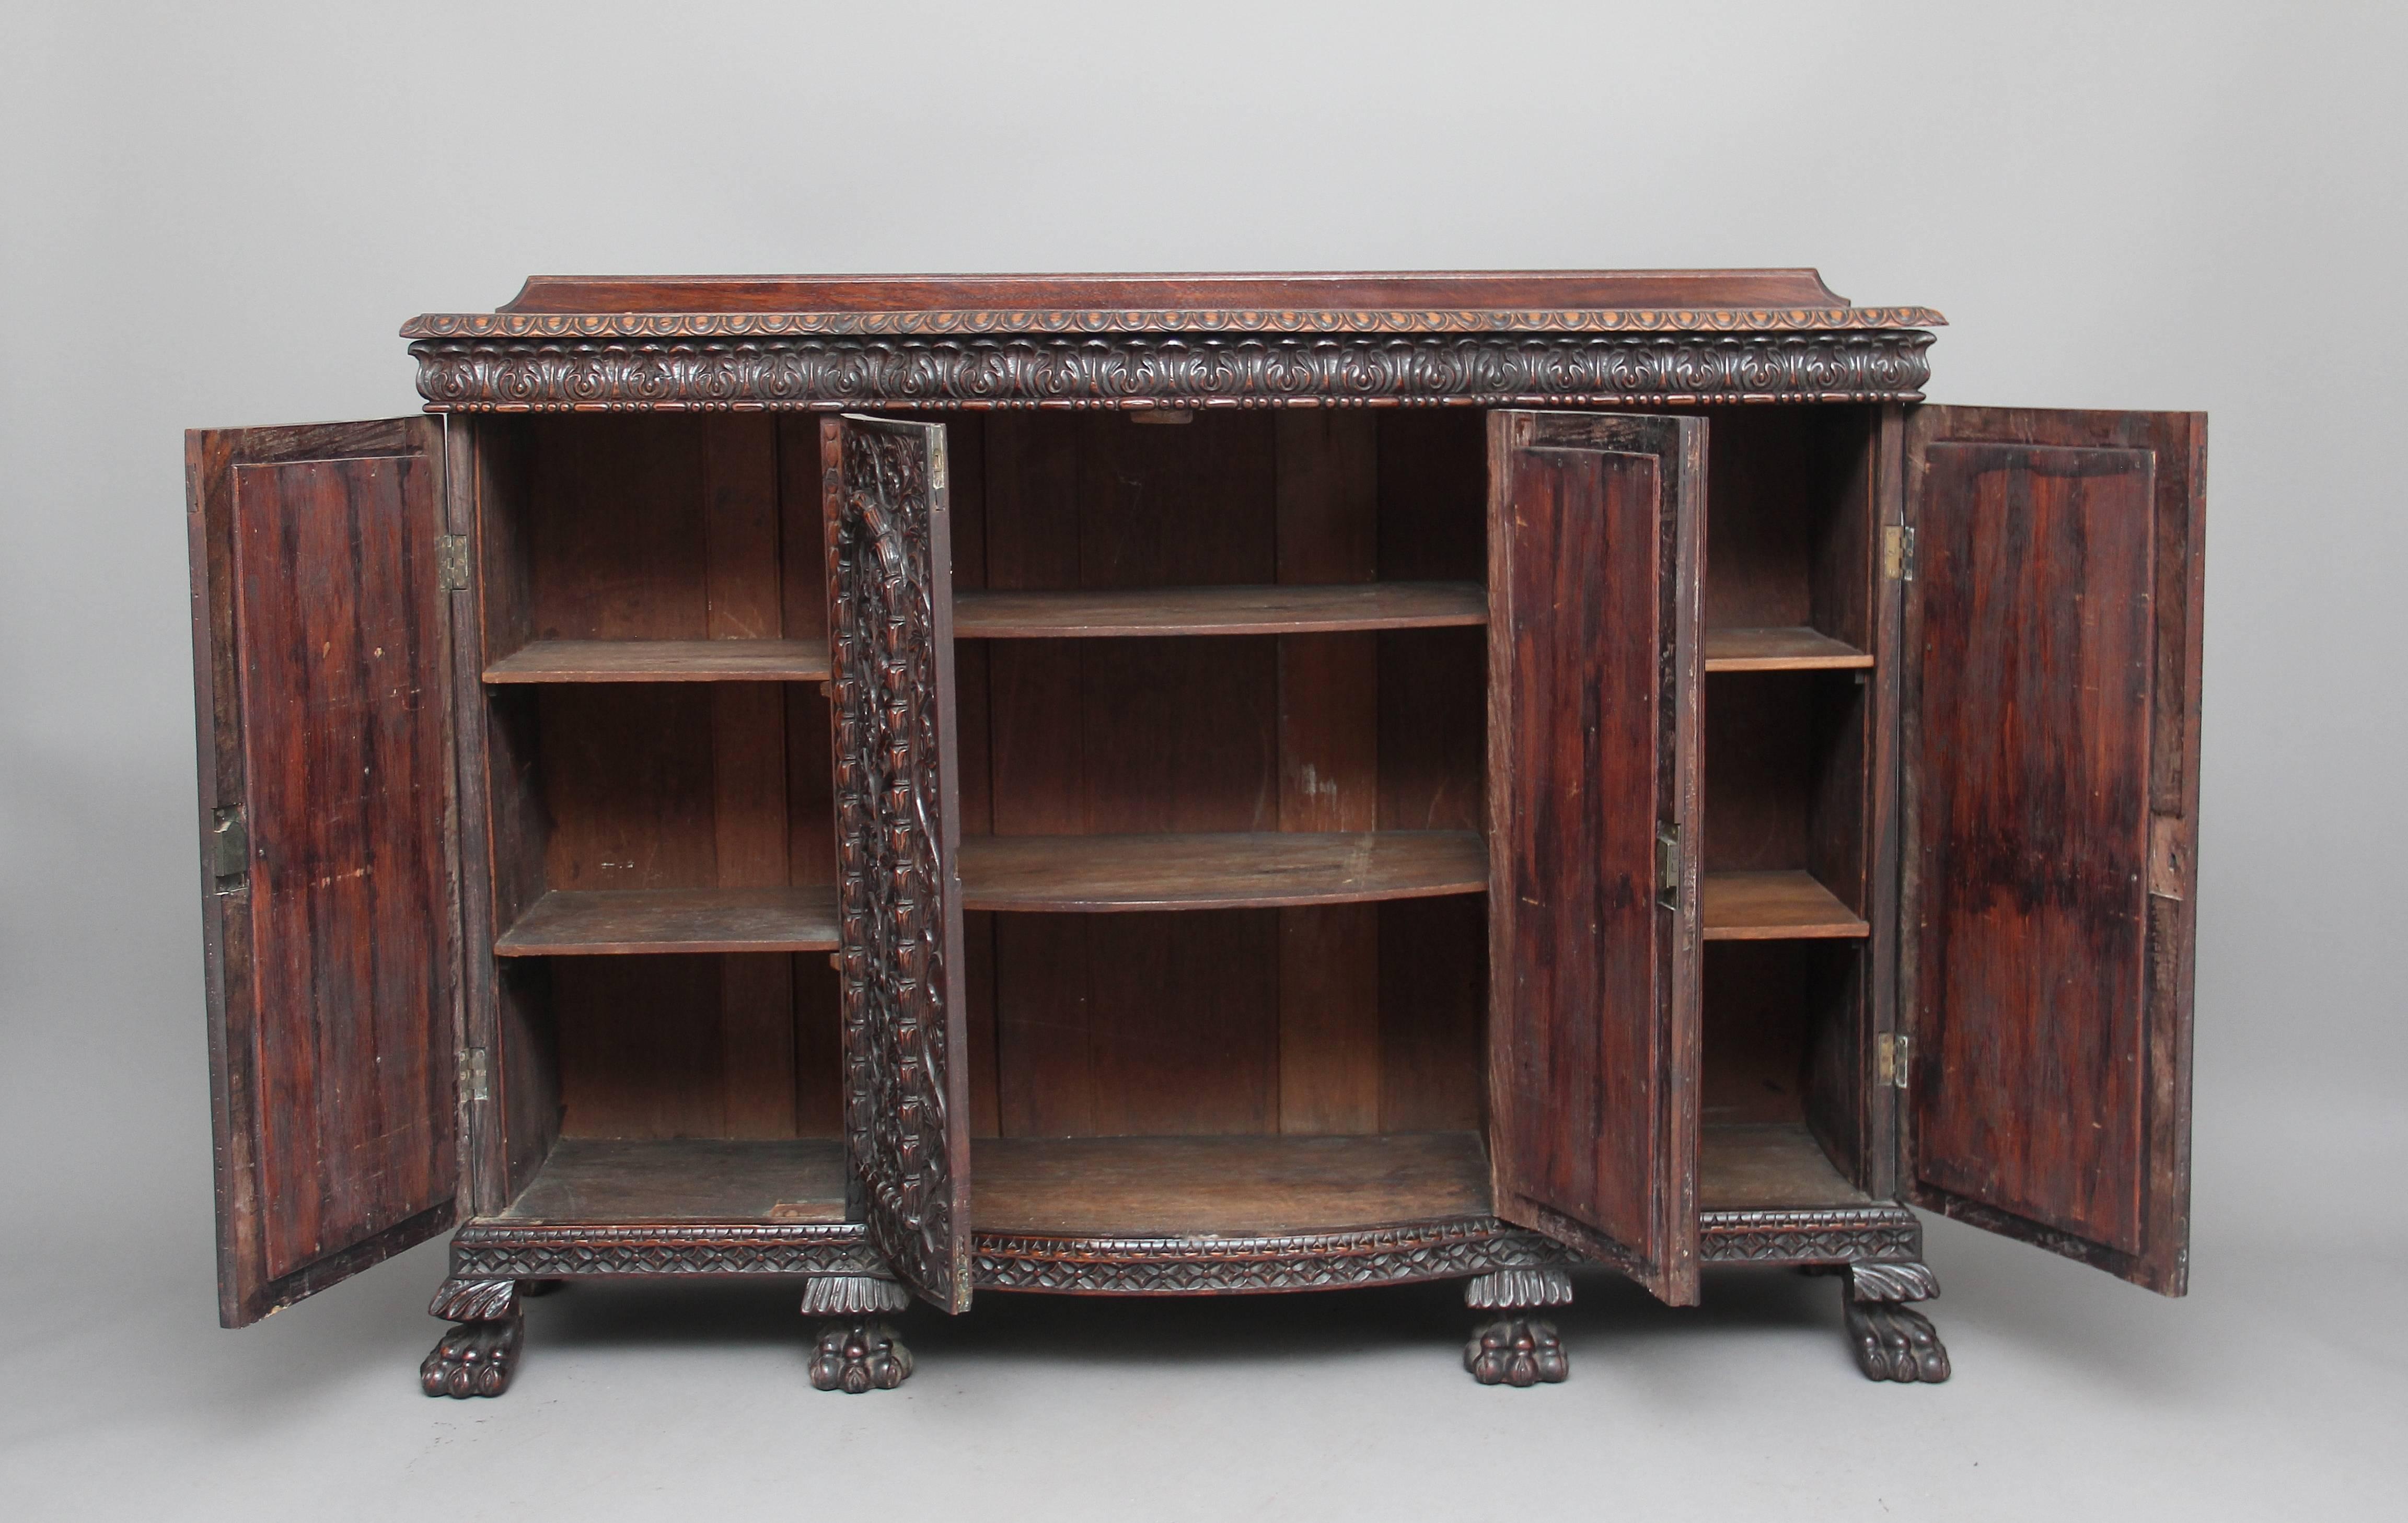 A superb quality 19th century carved rosewood Indian cabinet, the lovely figured shaped rosewood top with a beautifully carved moulded edge, above a shaped frieze with acanthus leaf carving, with four doors below opening to reveal two fixed shelves